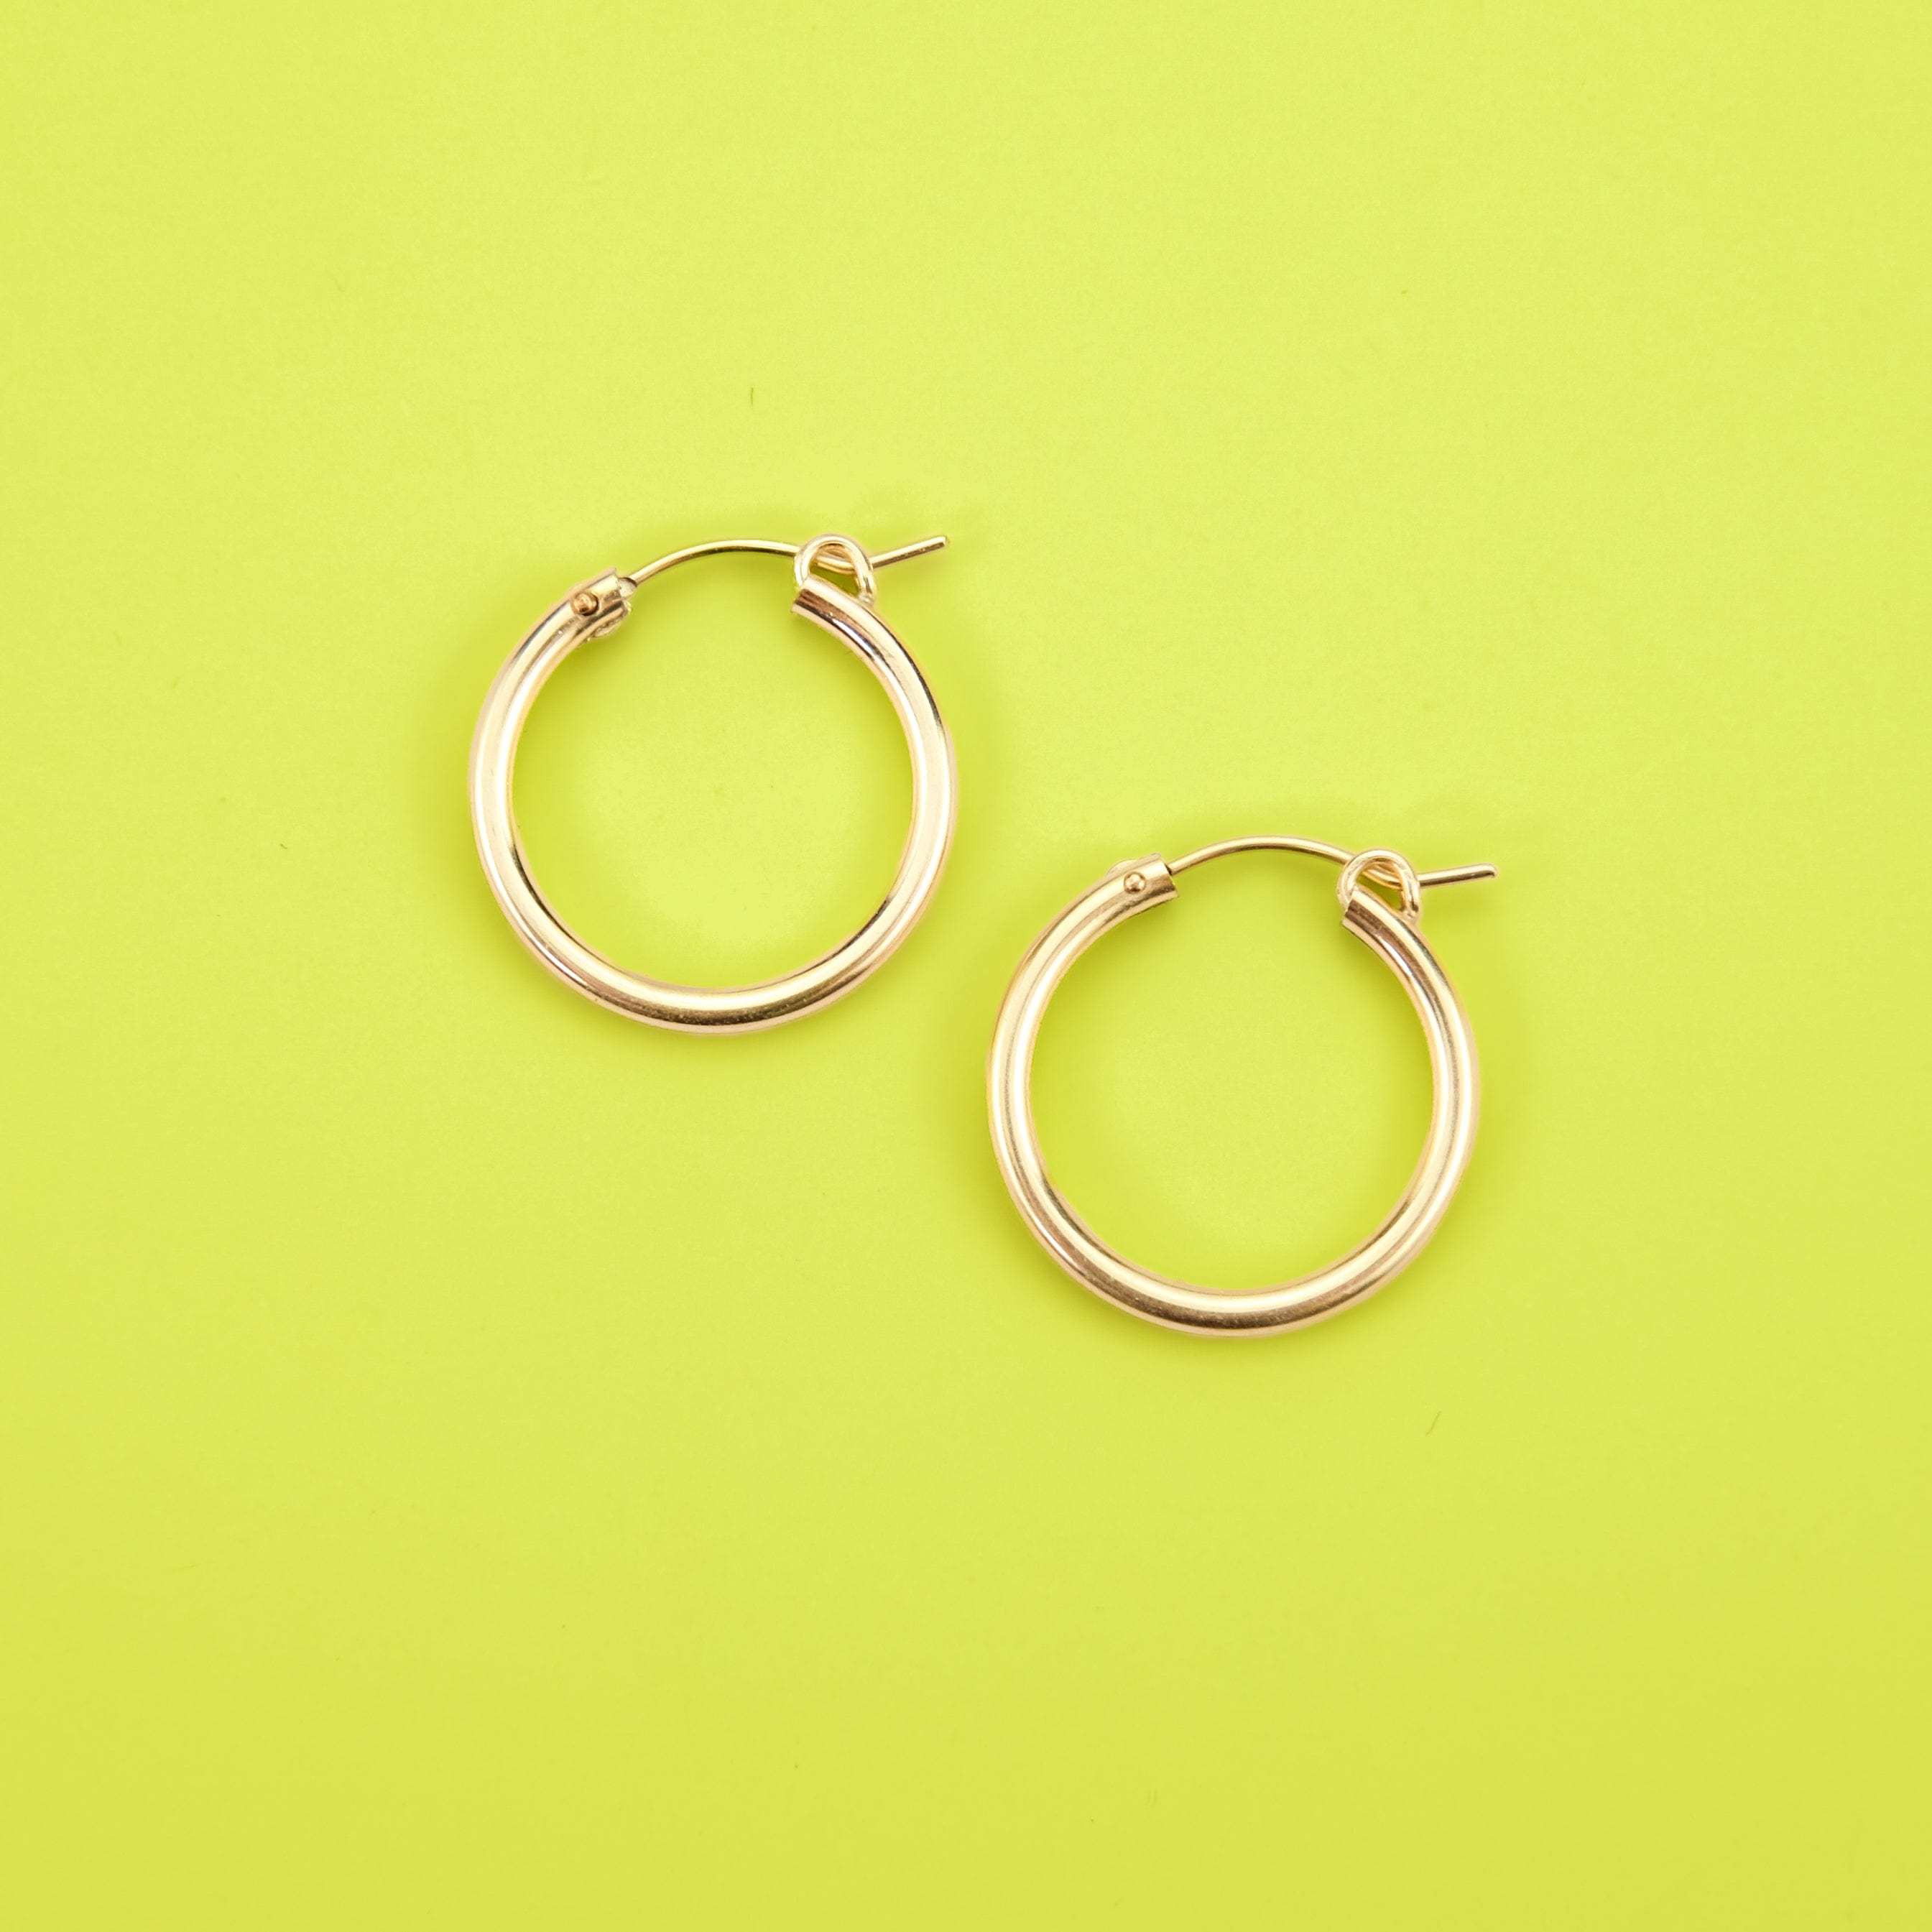 14k Gold-filled swappable mix and match hoop charm earrings